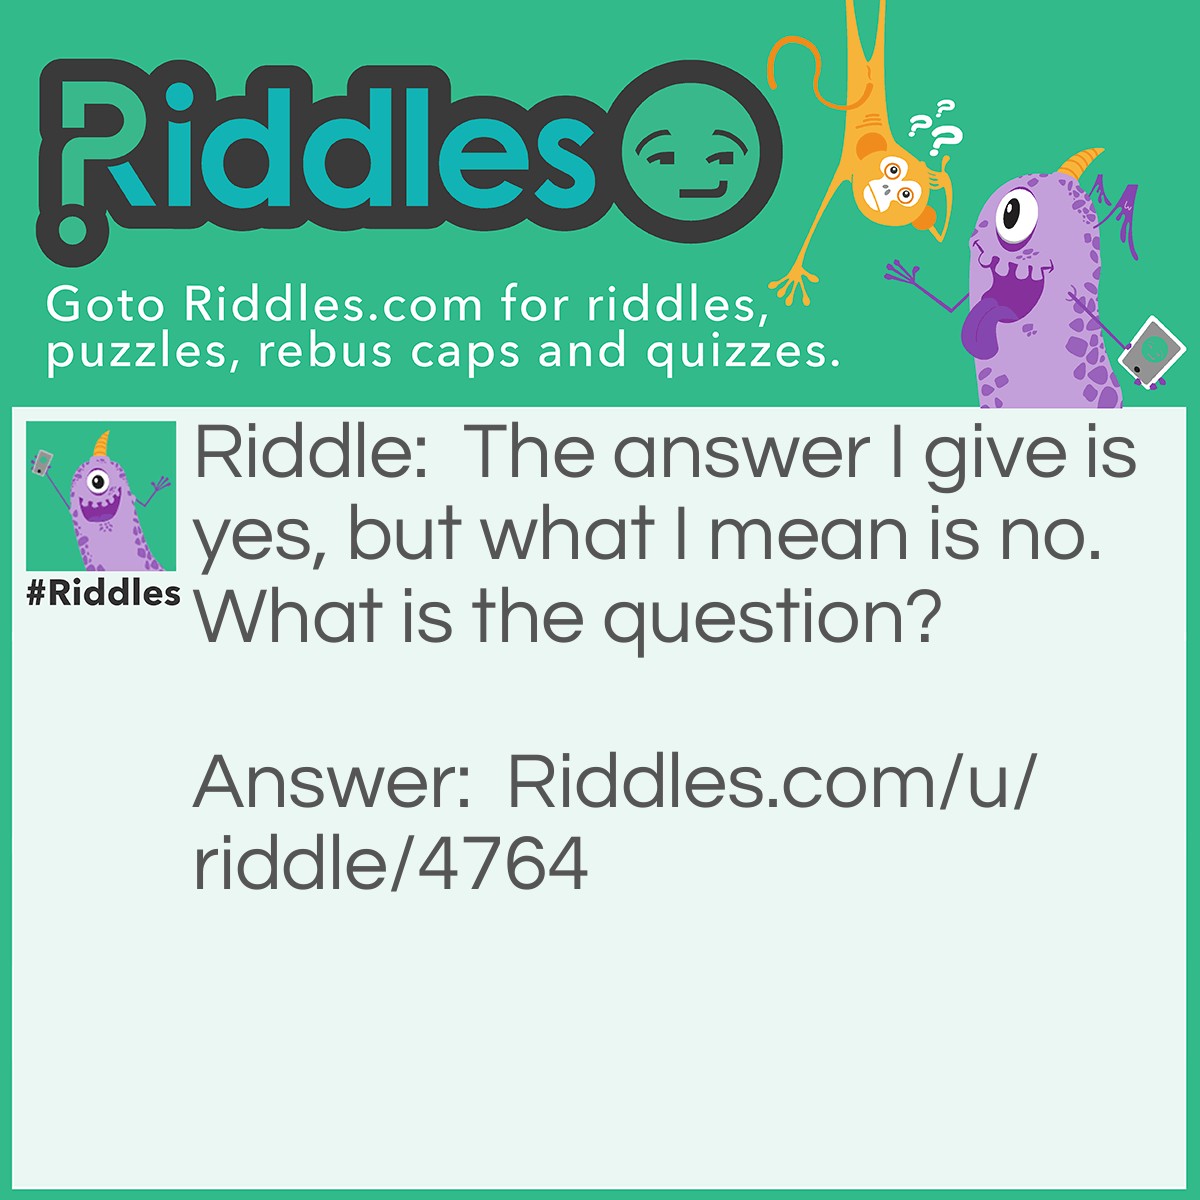 Riddle: The answer I give is yes, but what I mean is no. What is the question? Answer: Do you mind?